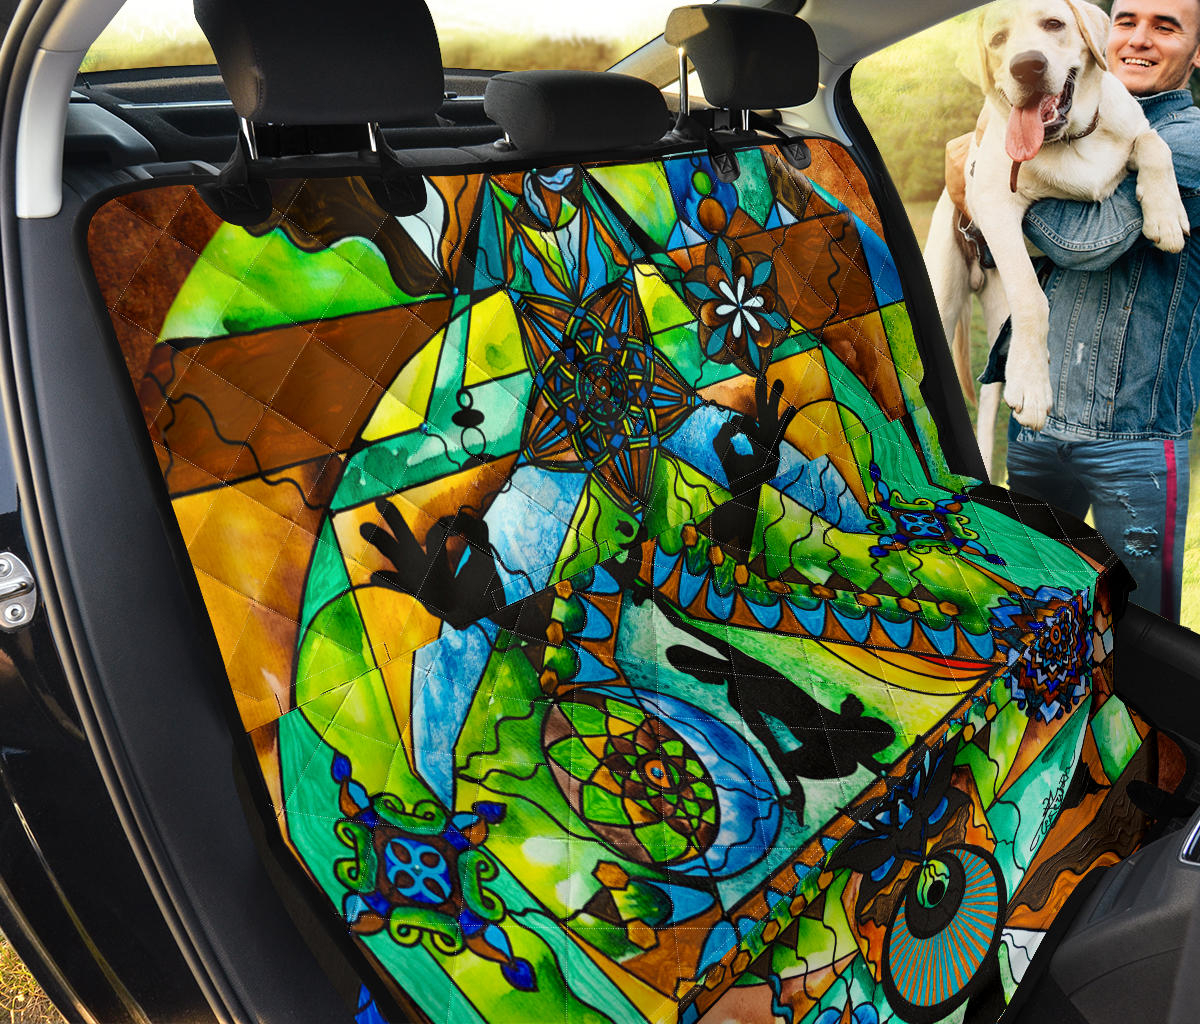 Stability Aid - Pet Seat Cover